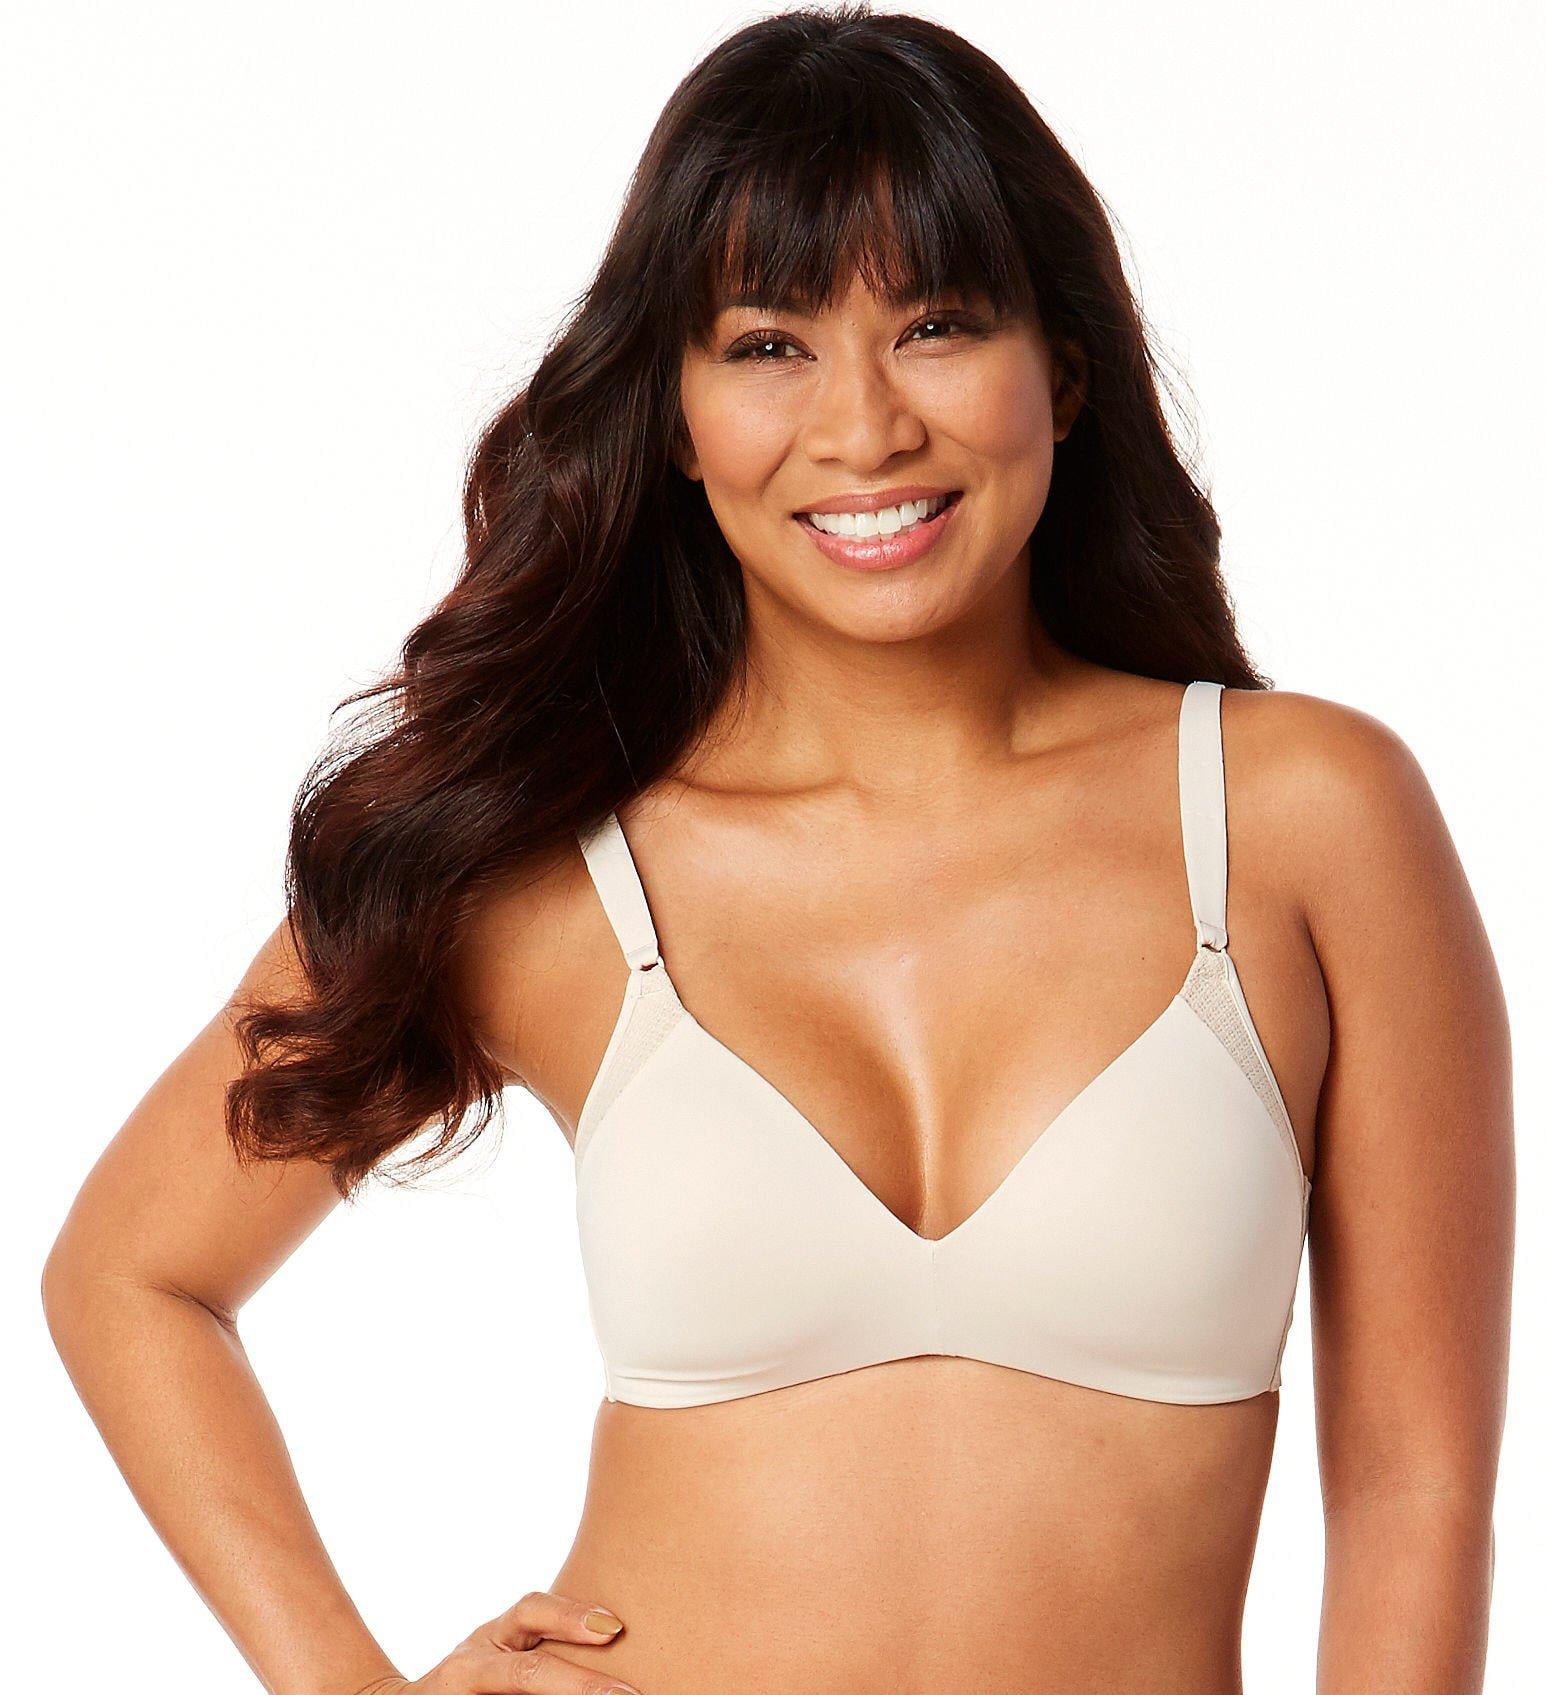 Warner's Underwire Bra Cooling Breathable Contour Comfort Breathe Freely  RB5931A